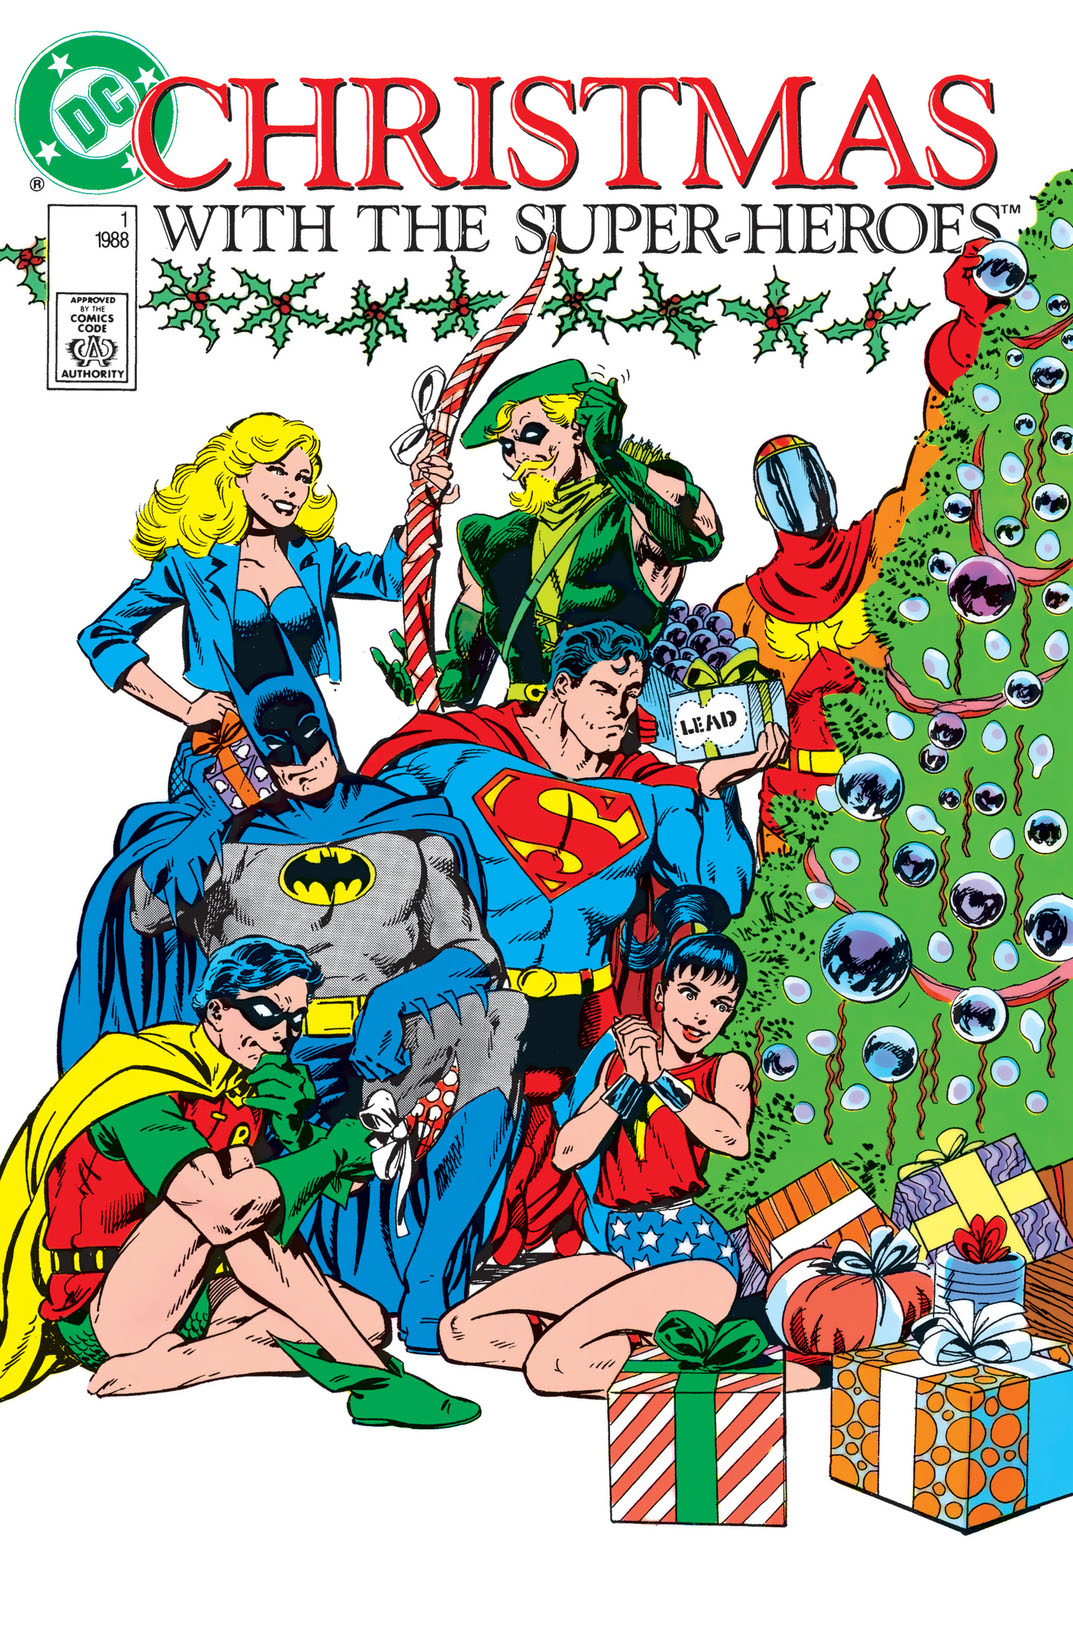 Christmas with the Super-Heroes #1 preview images